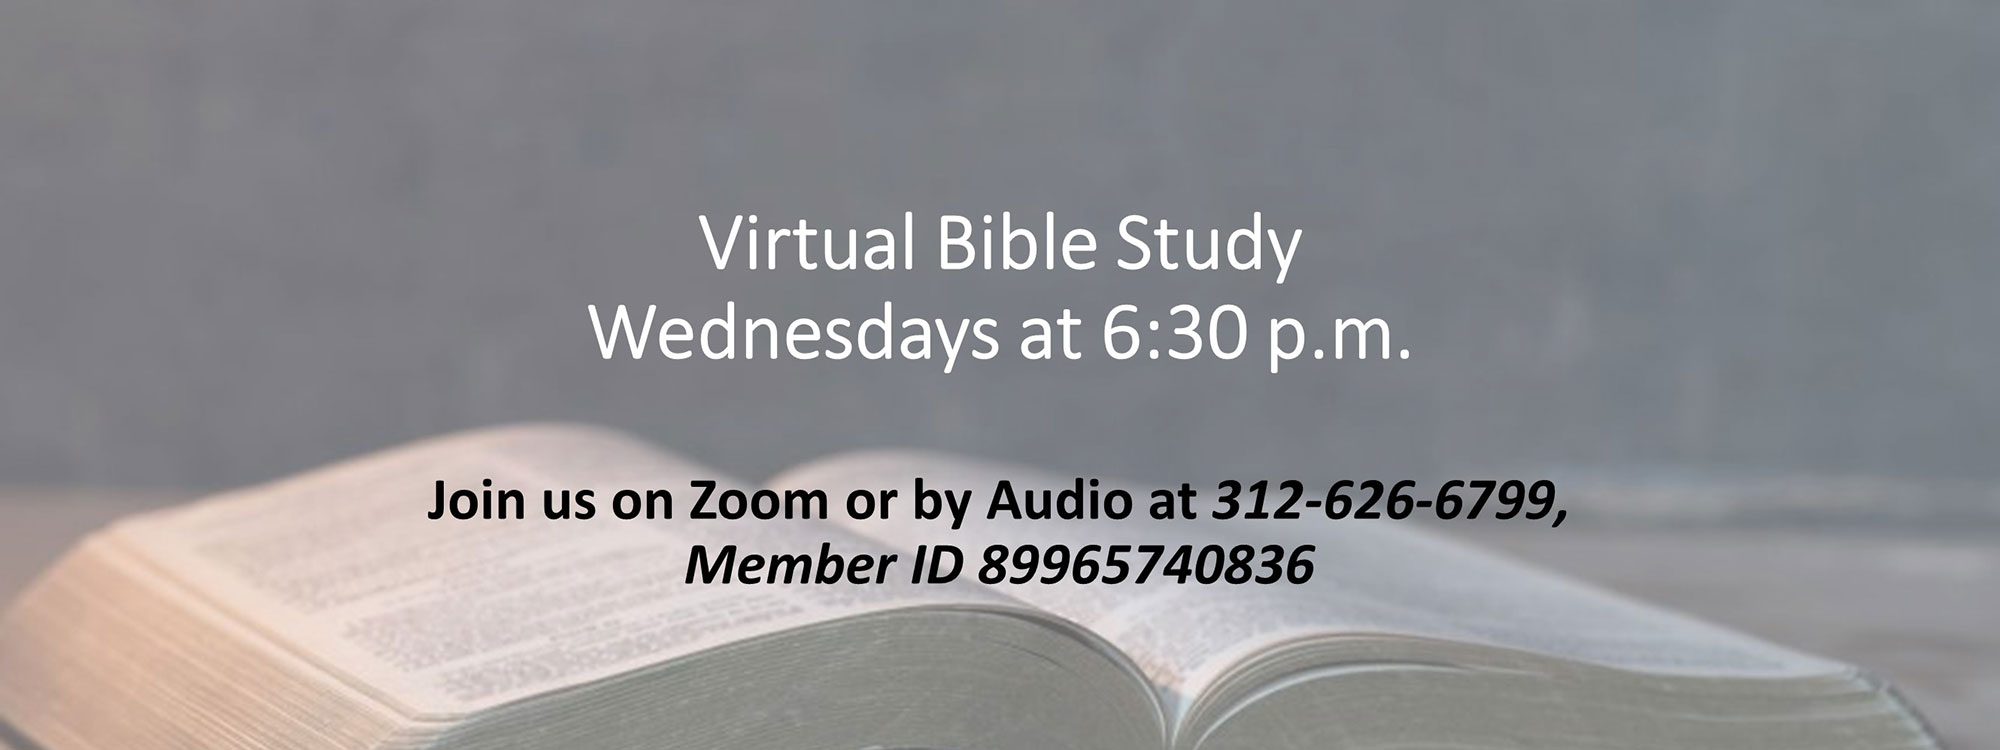 Bible Study with Zoom